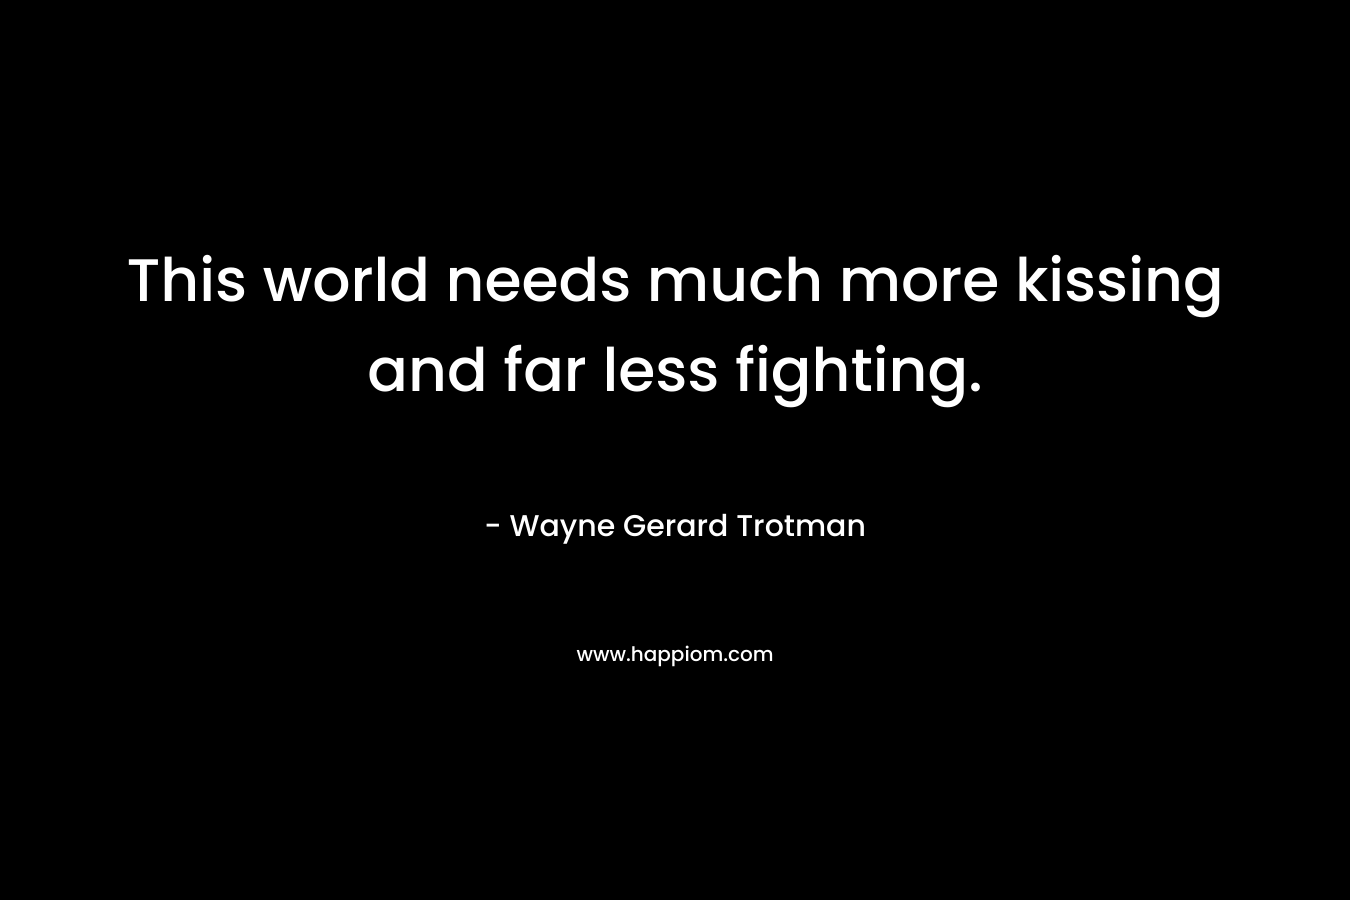 This world needs much more kissing and far less fighting.